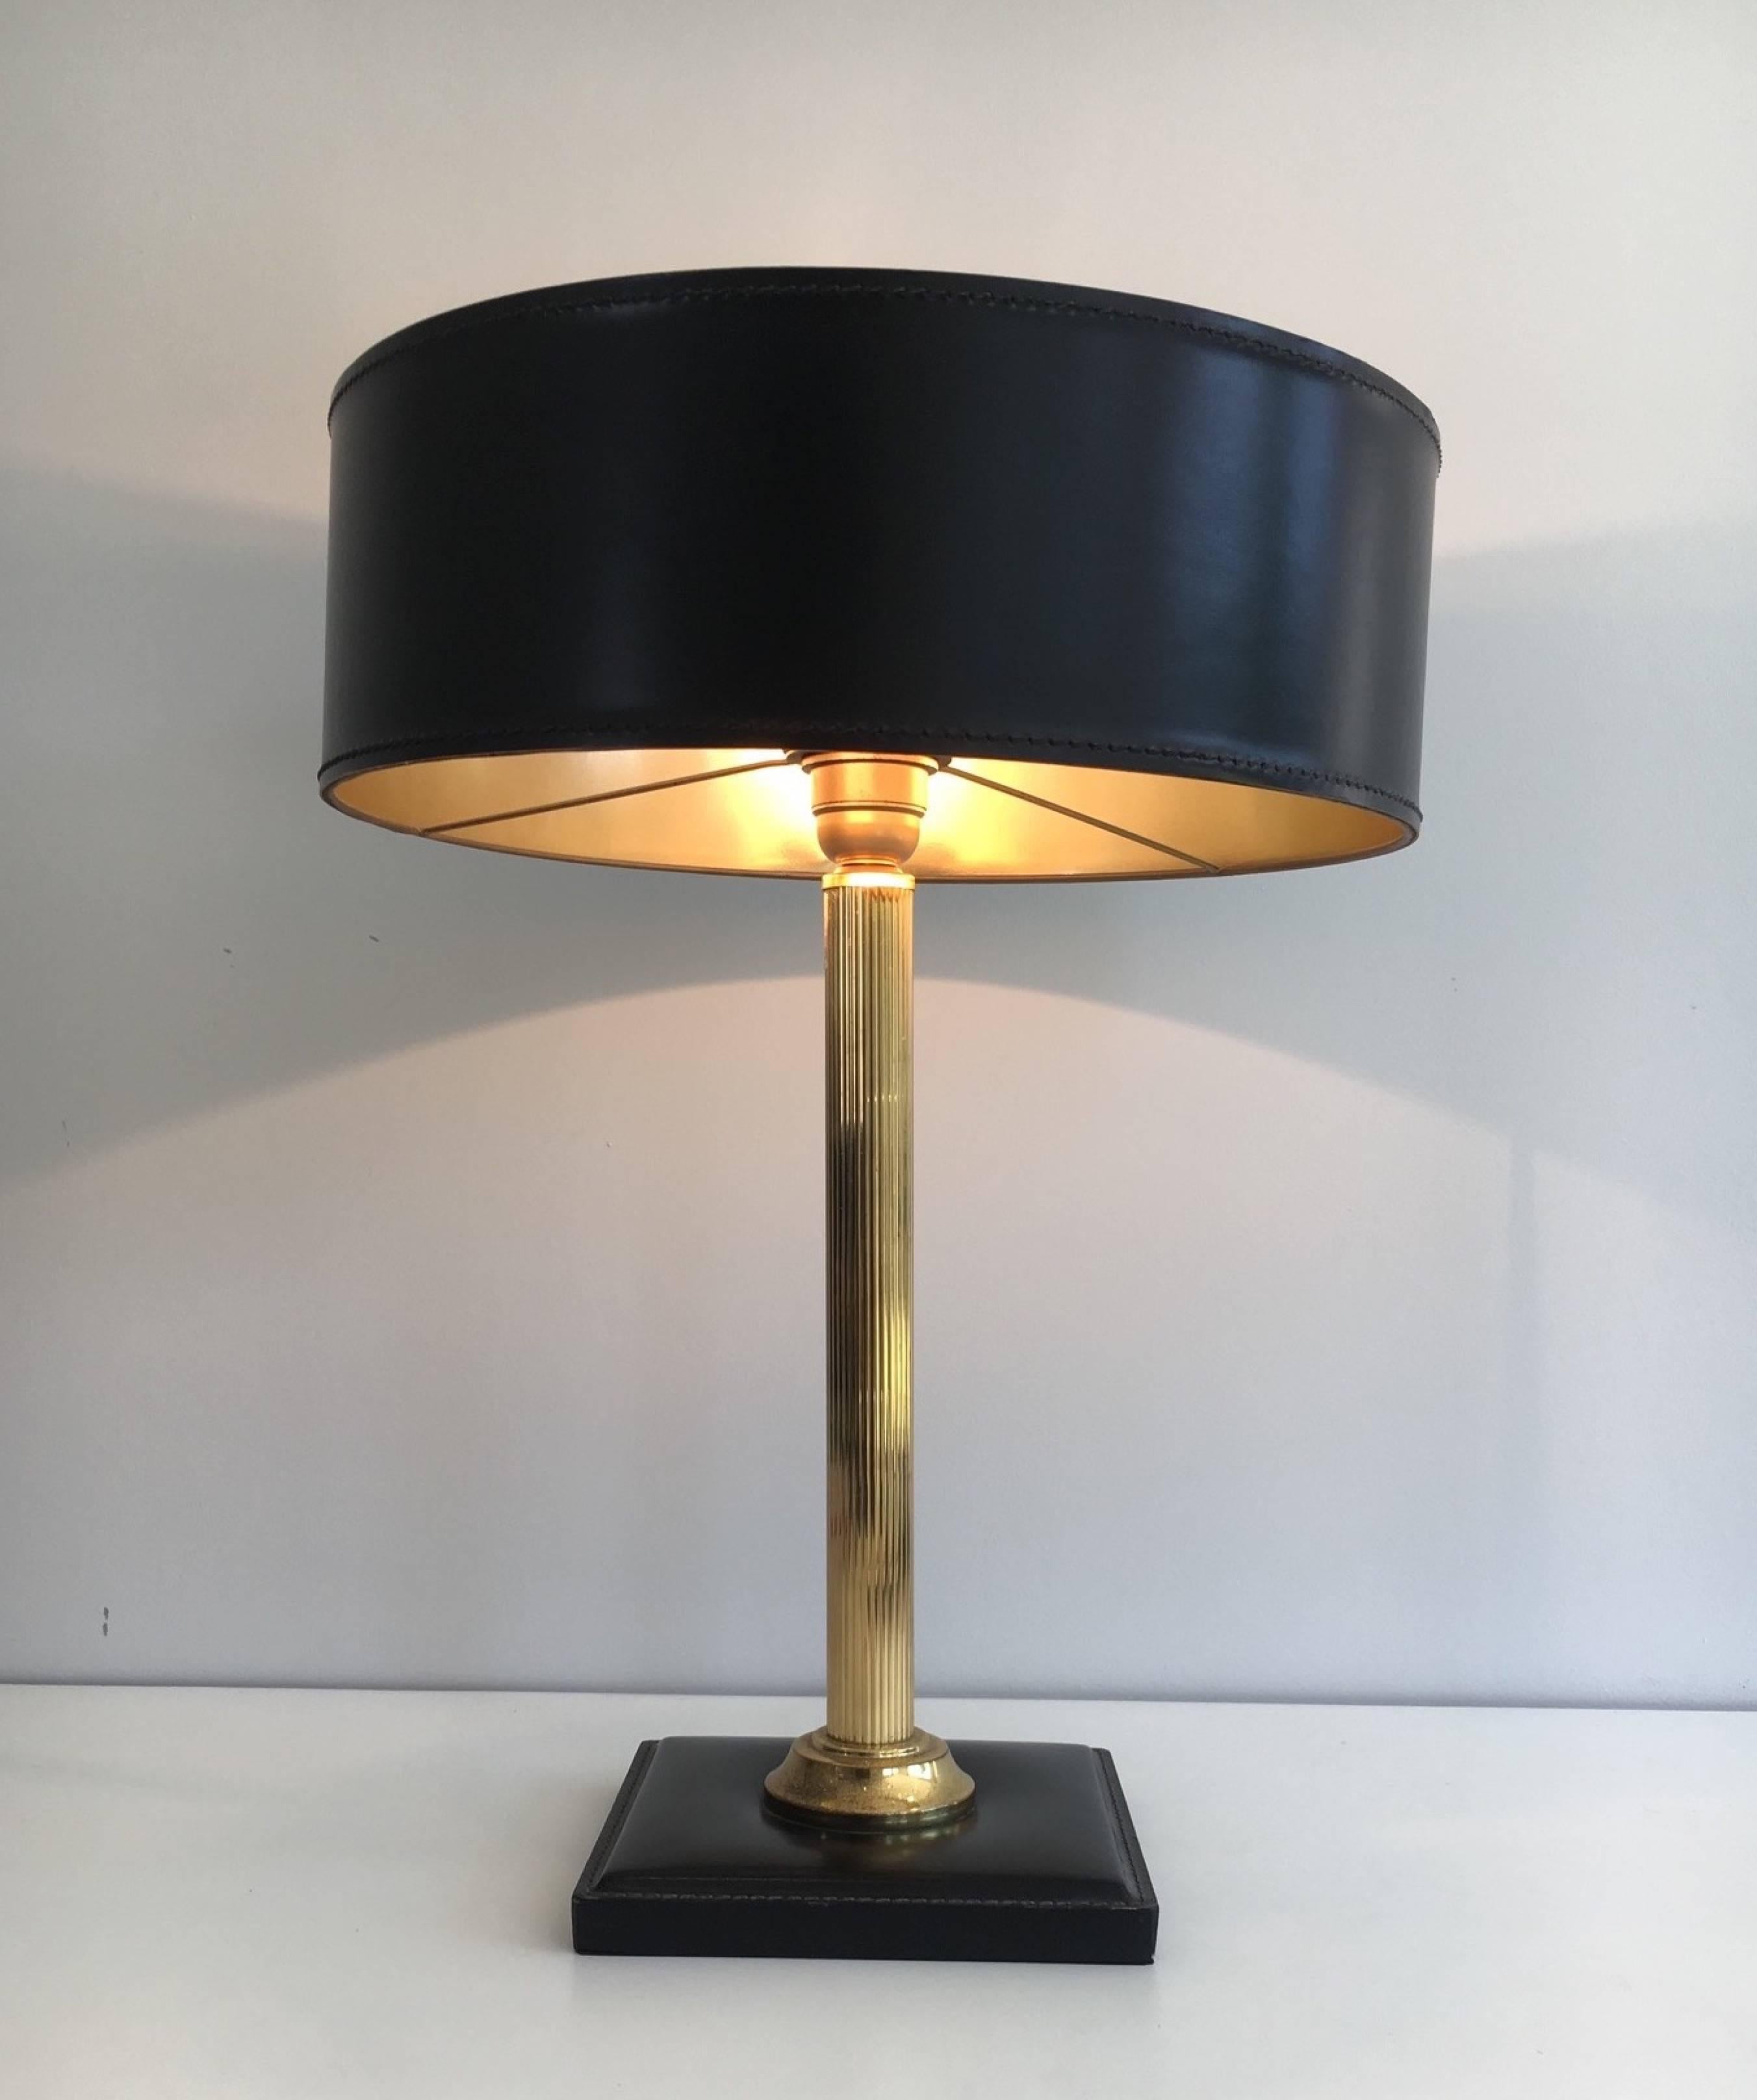 An unusual table lamp in the style of Jacques Adnet. The fluted brass stem is supported on a leather covered base and the shade is stitched leather with gold lining, French, circa 1940.

This lamp is currently in France, please allow 2 to 4 weeks